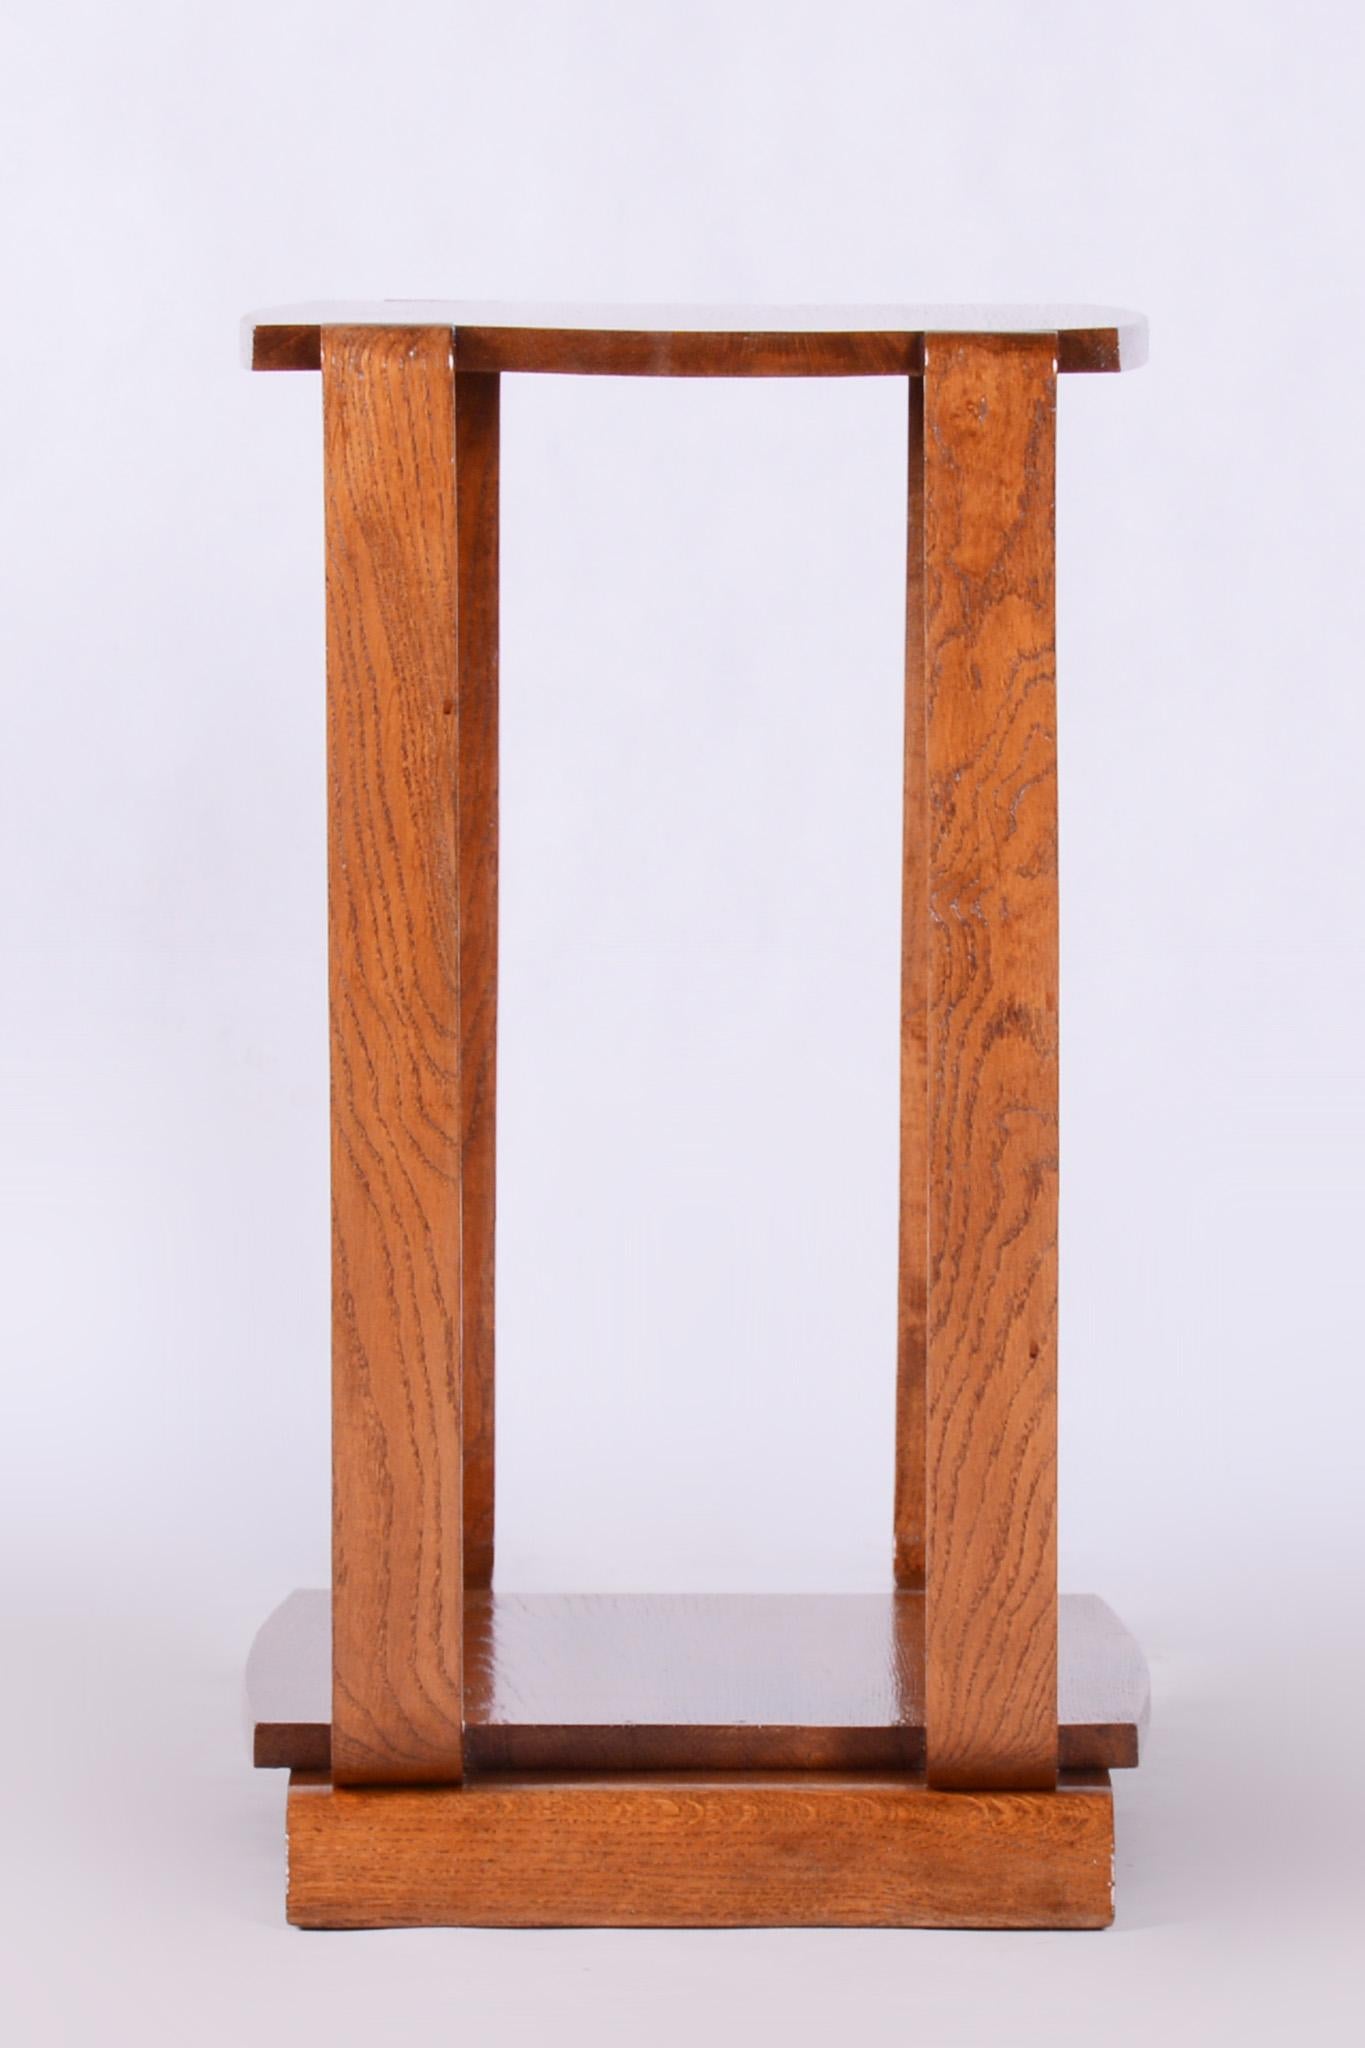 Restored Walnut Art Deco Side Table Made in 1930s, France, Revived Polish For Sale 3